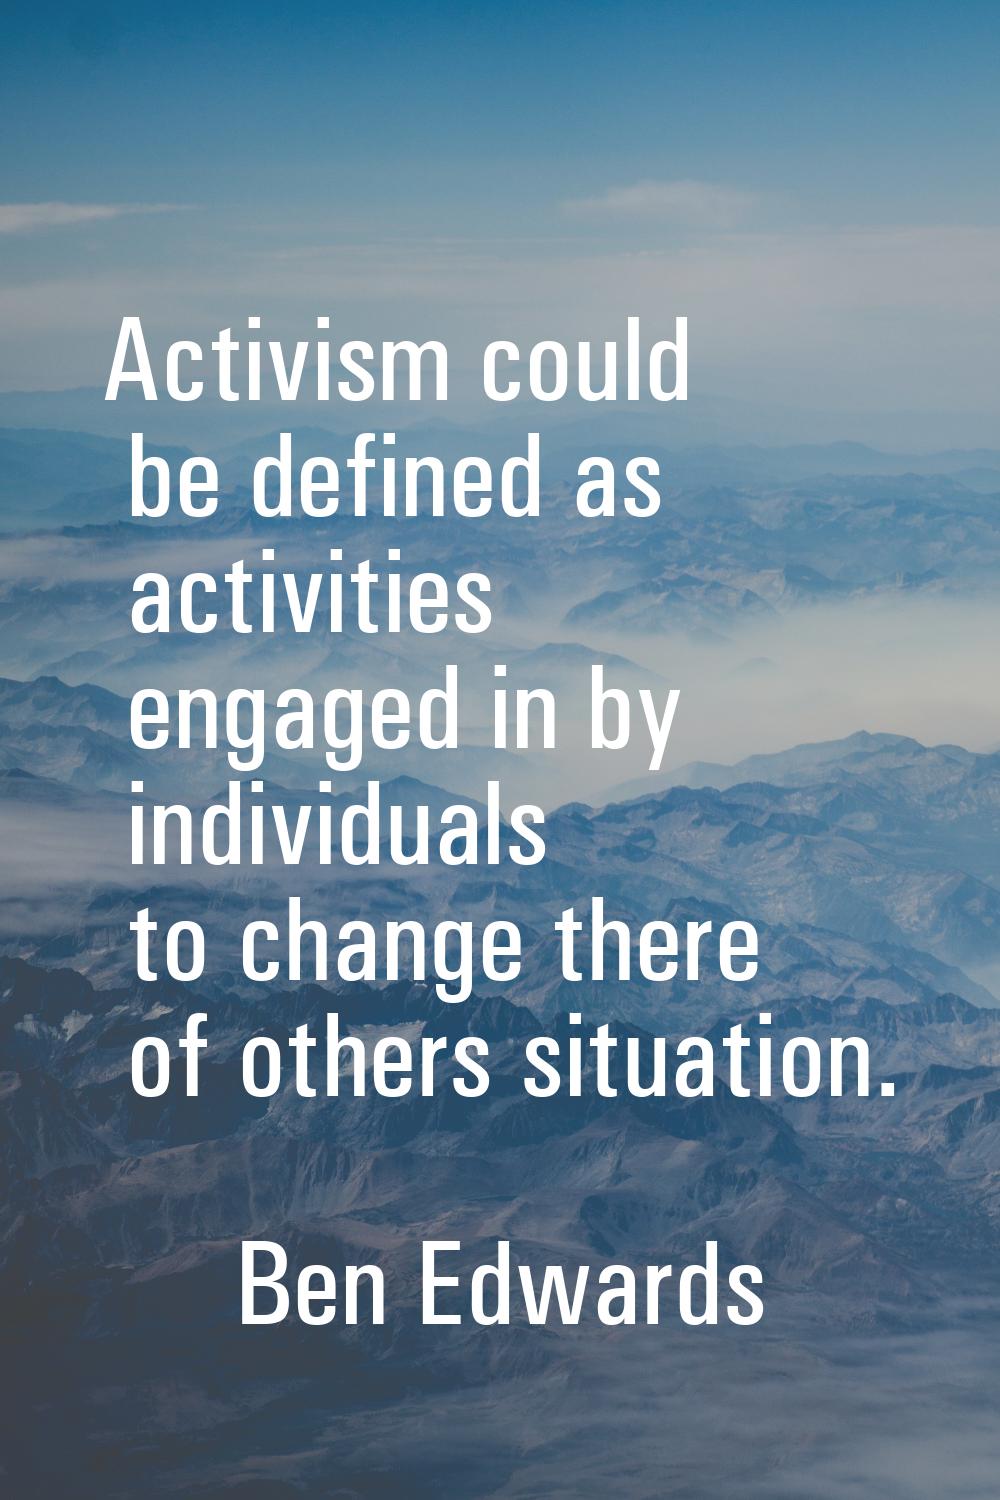 Activism could be defined as activities engaged in by individuals to change there of others situati